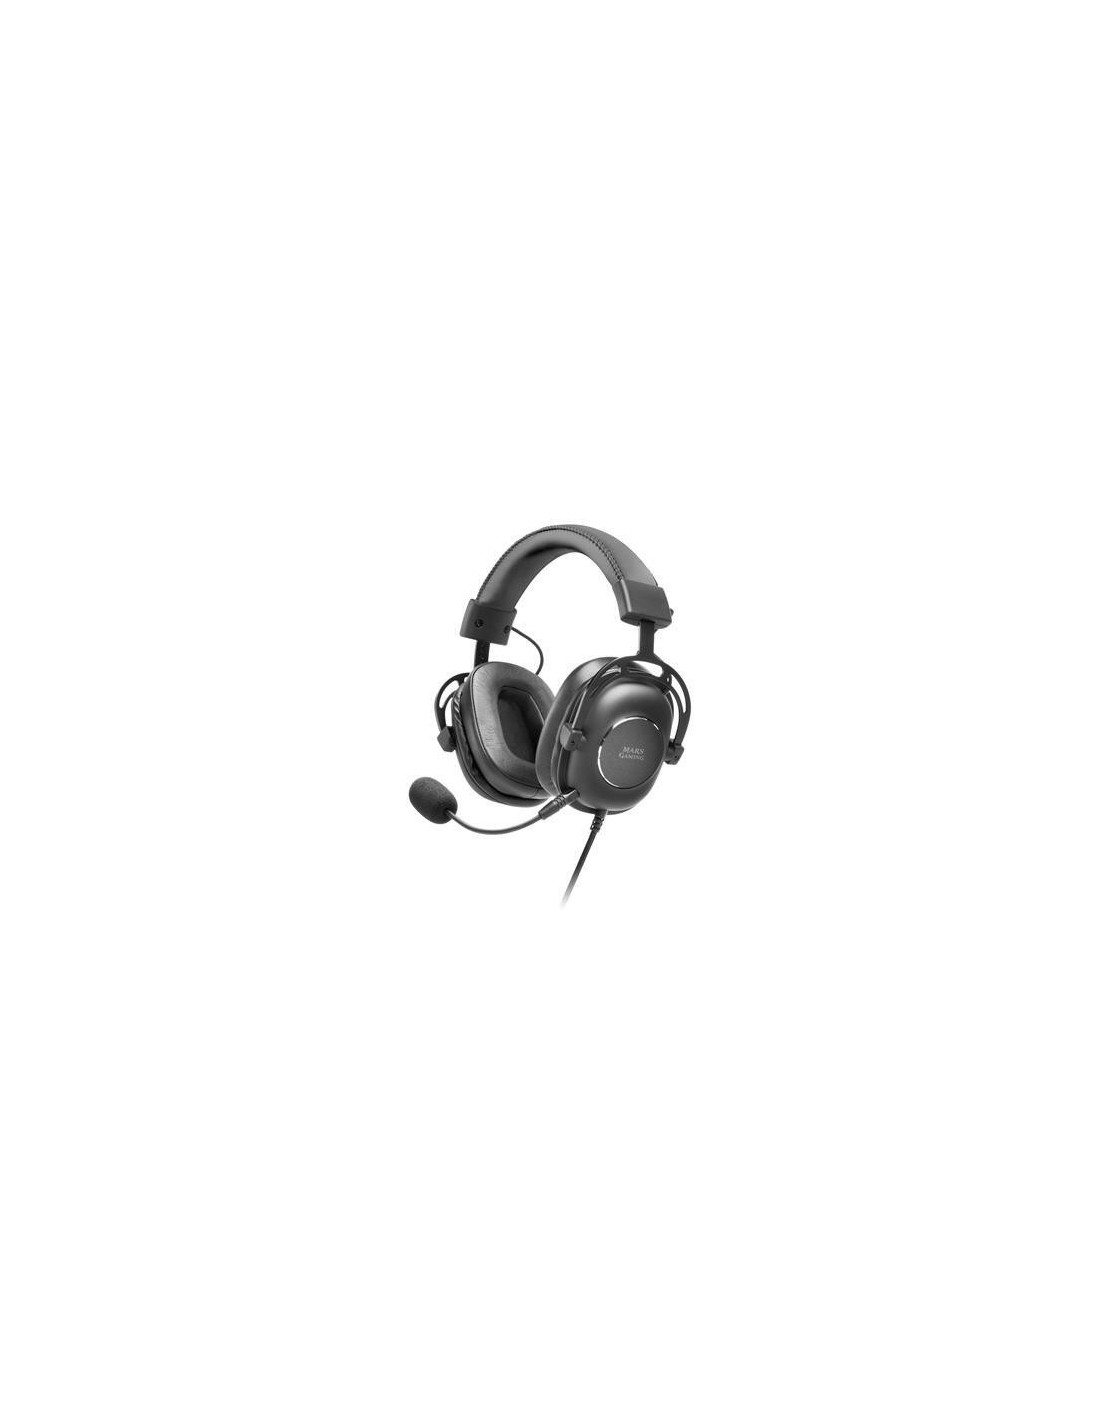 AURICULARES PROFESIONALES MH6 - Mars Gaming